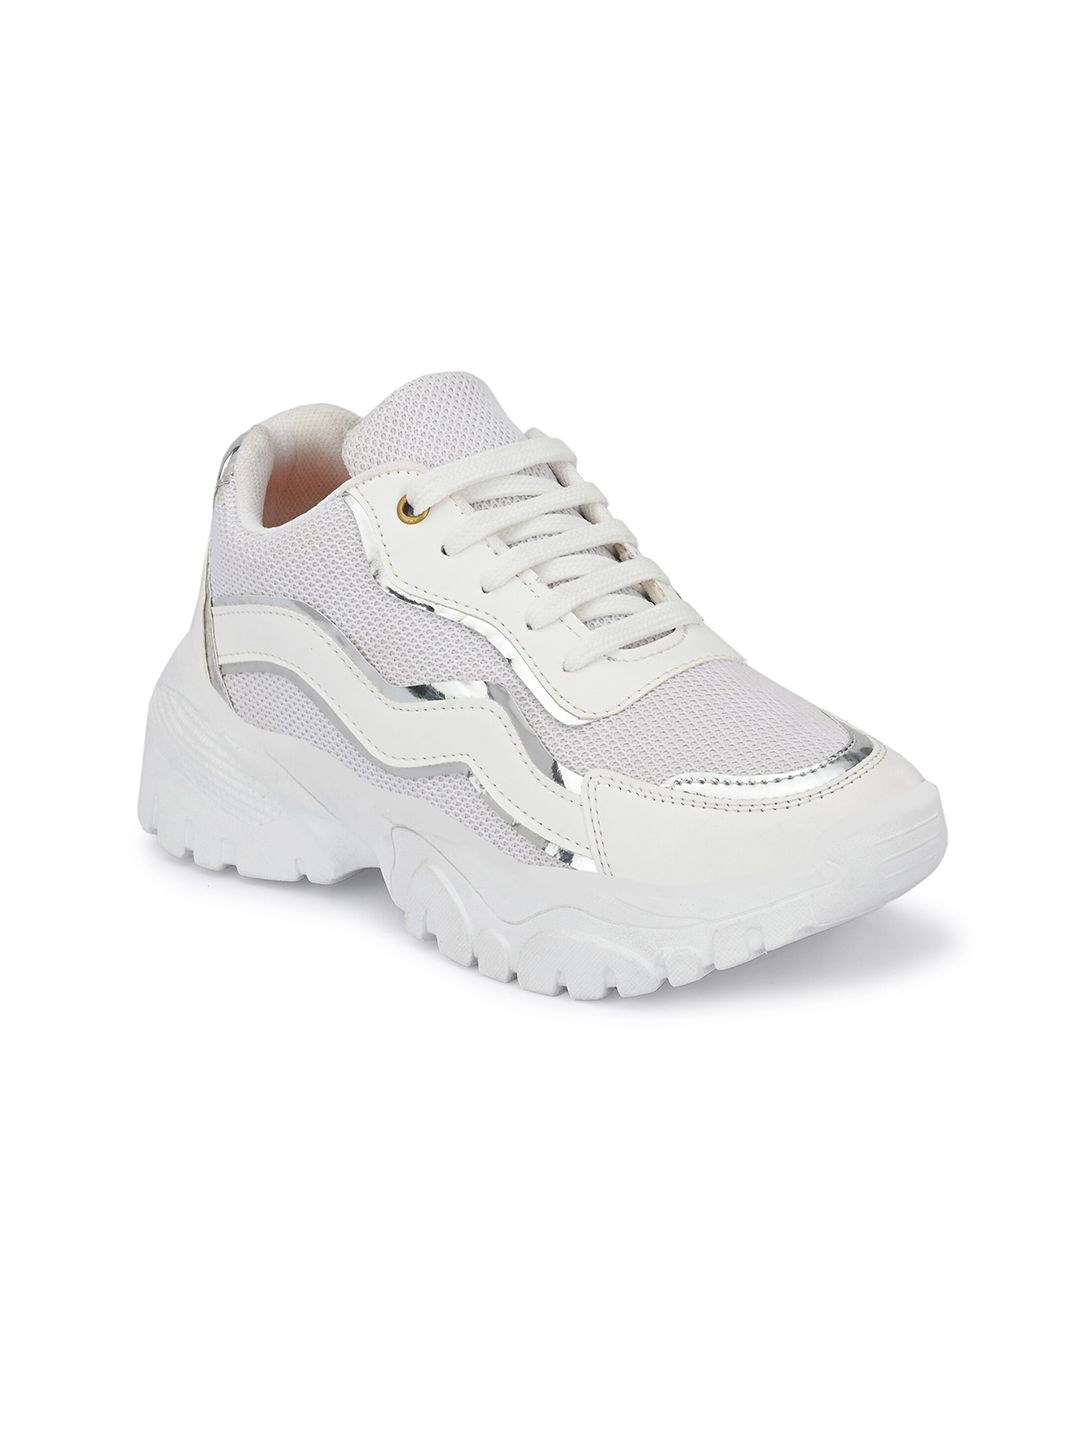 AfroJack Women White Running Shoes Price in India